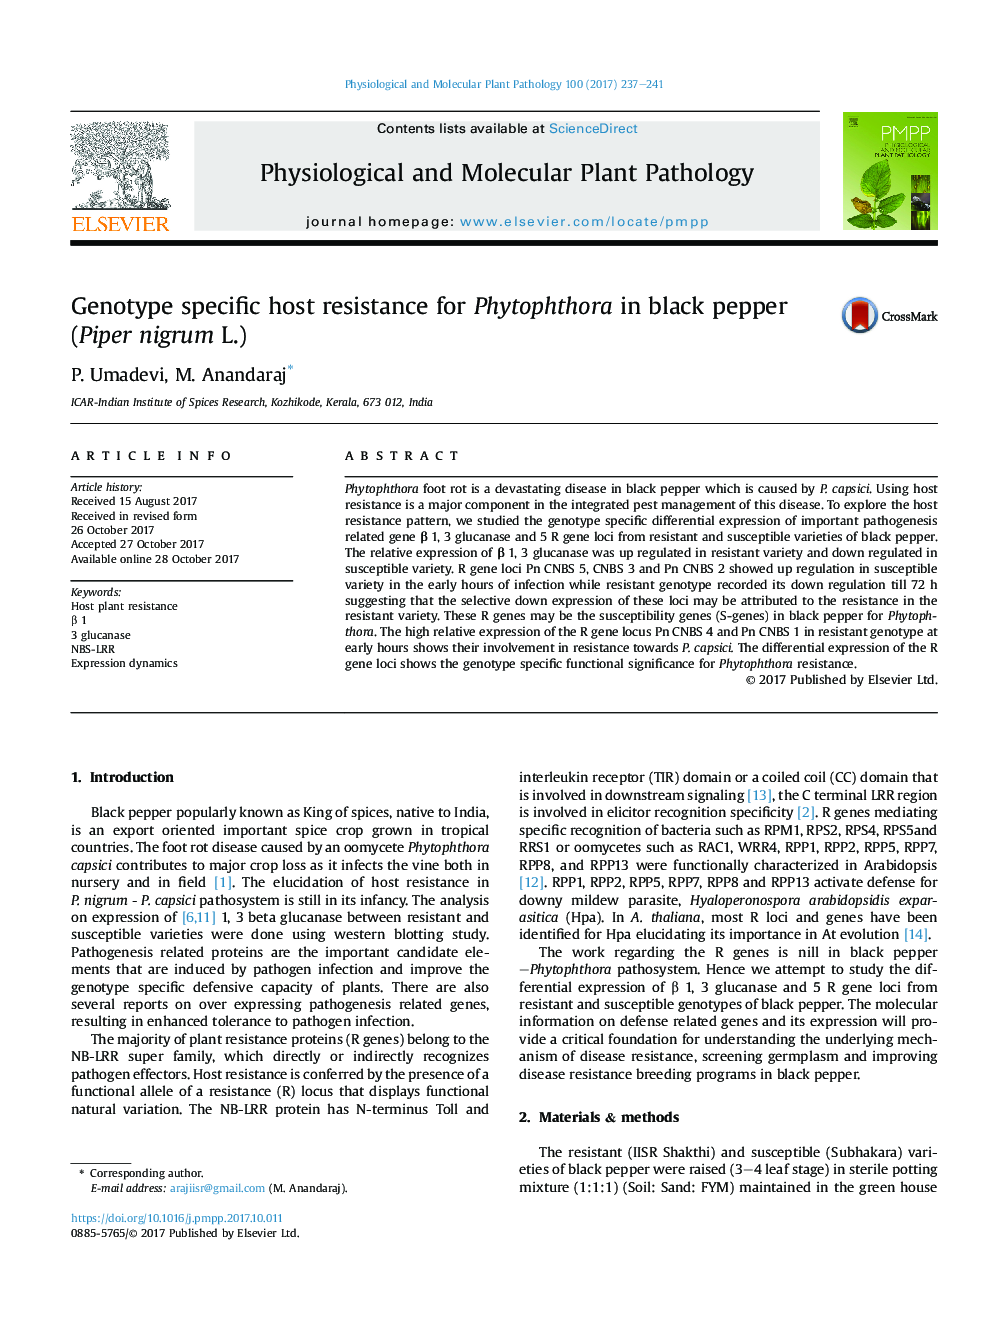 Genotype specific host resistance for Phytophthora in black pepper (Piper nigrum L.)